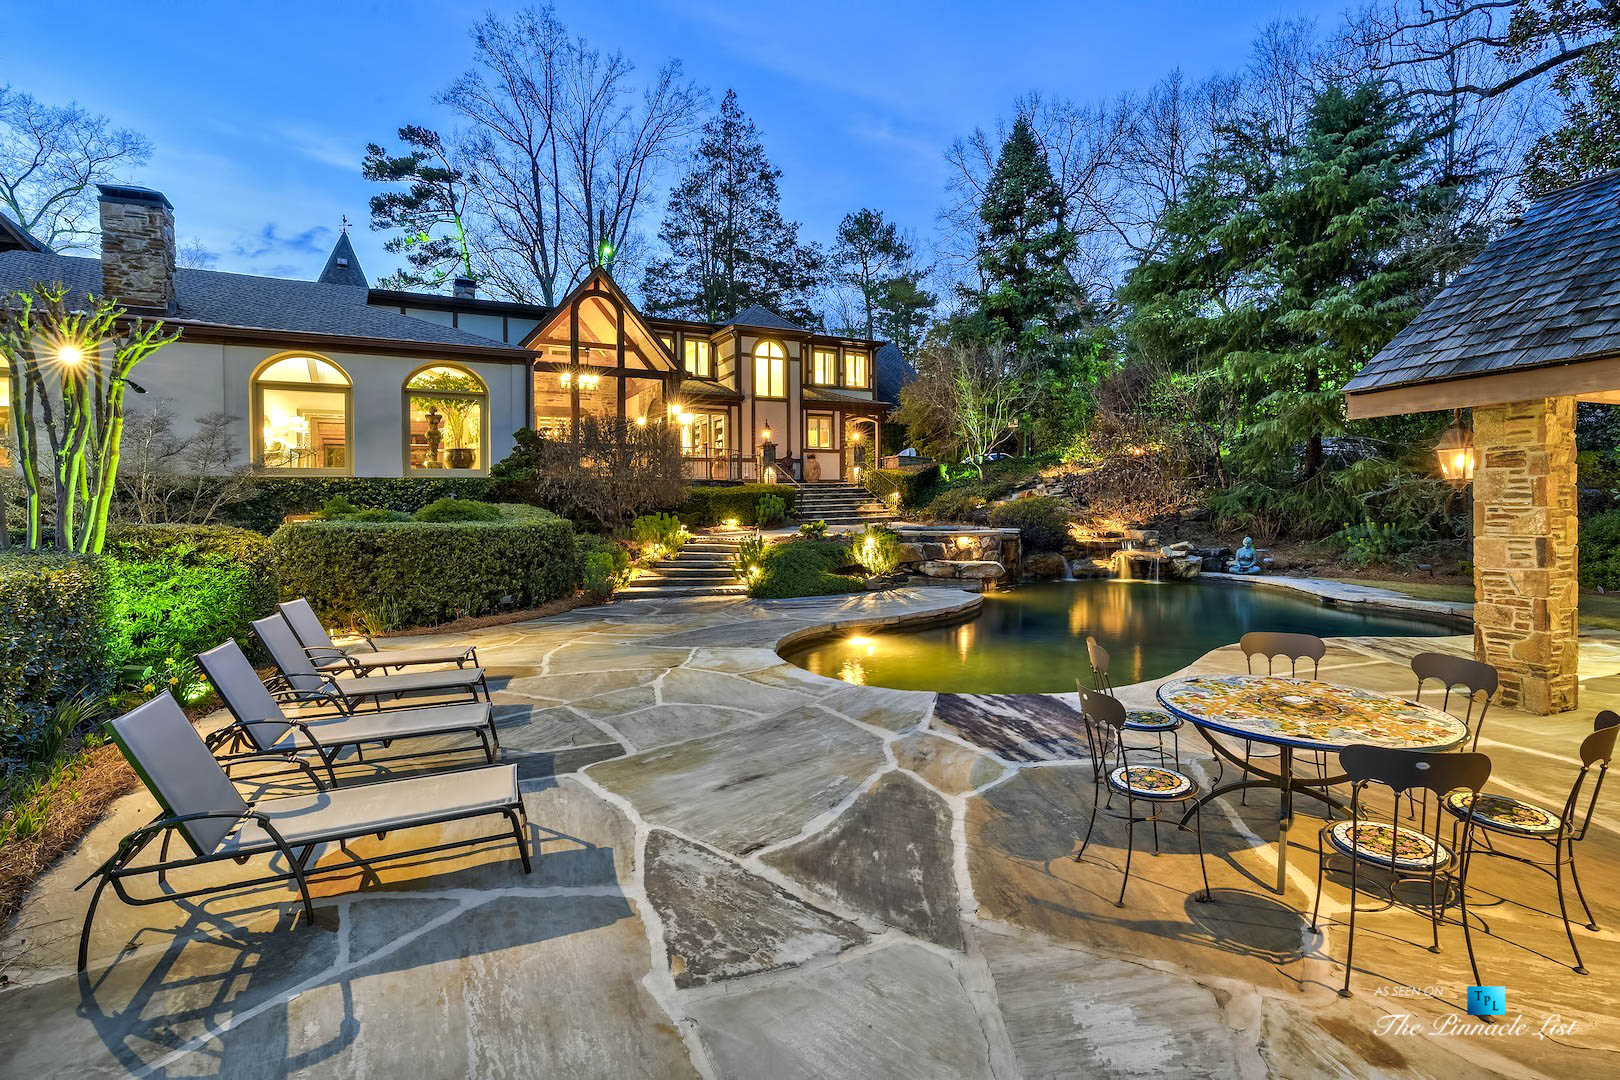 75 Finch Forest Trail, Atlanta, GA, USA - Evening Backyard Pool View - Luxury Real Estate - Sandy Springs Home